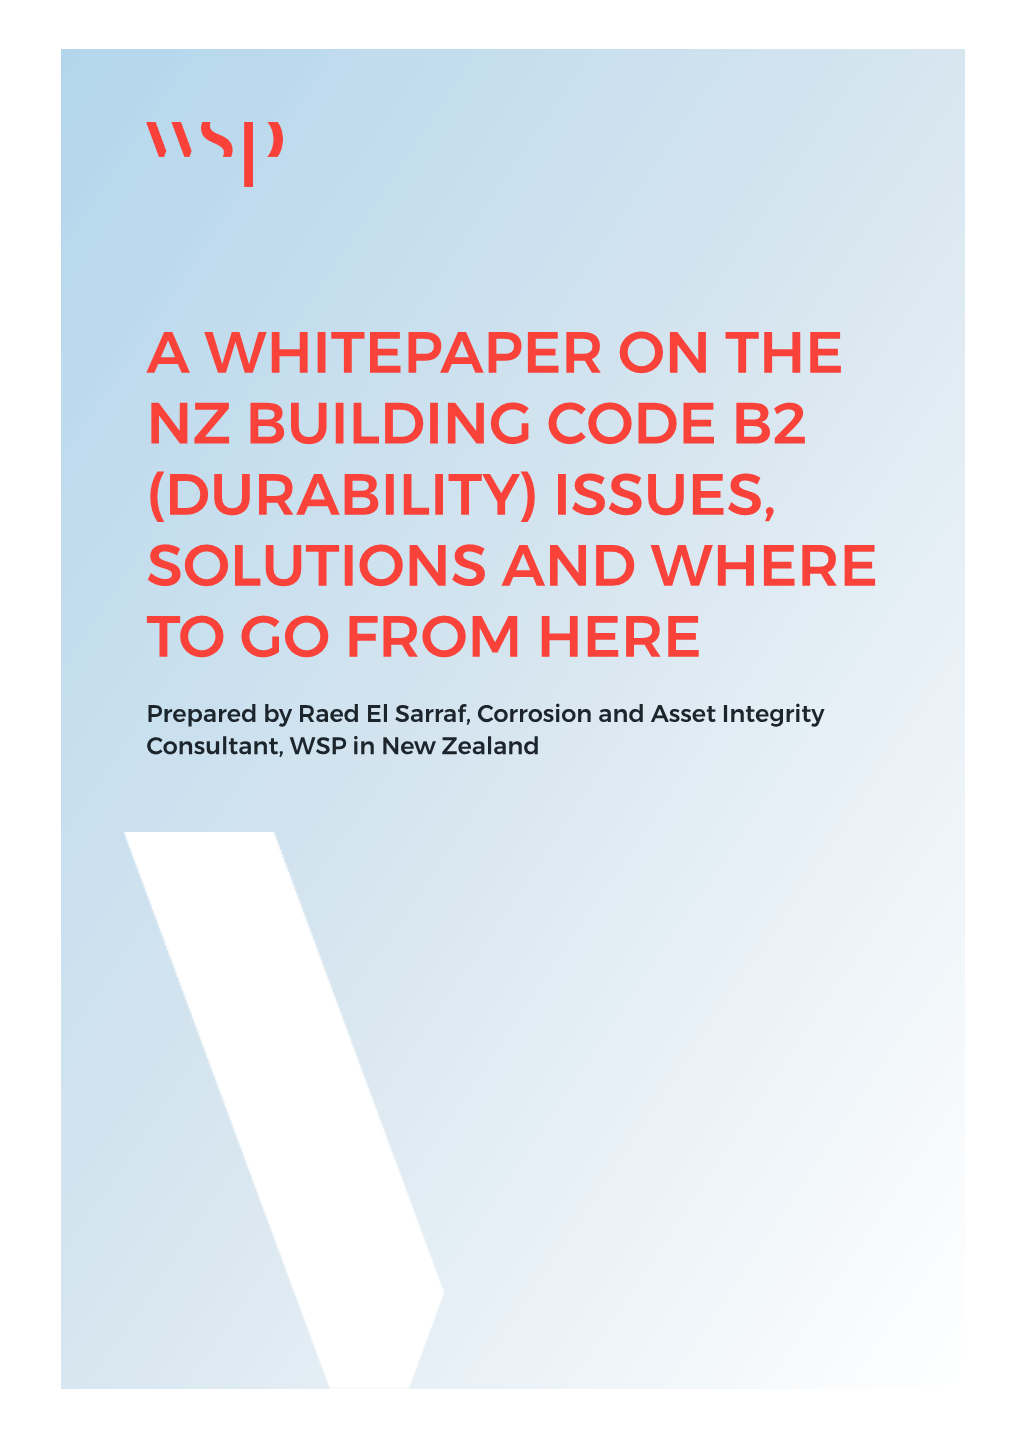 A Whitepaper on the Nz Building Code B2 (Durability) Issues, Solutions and Where to Go from Here